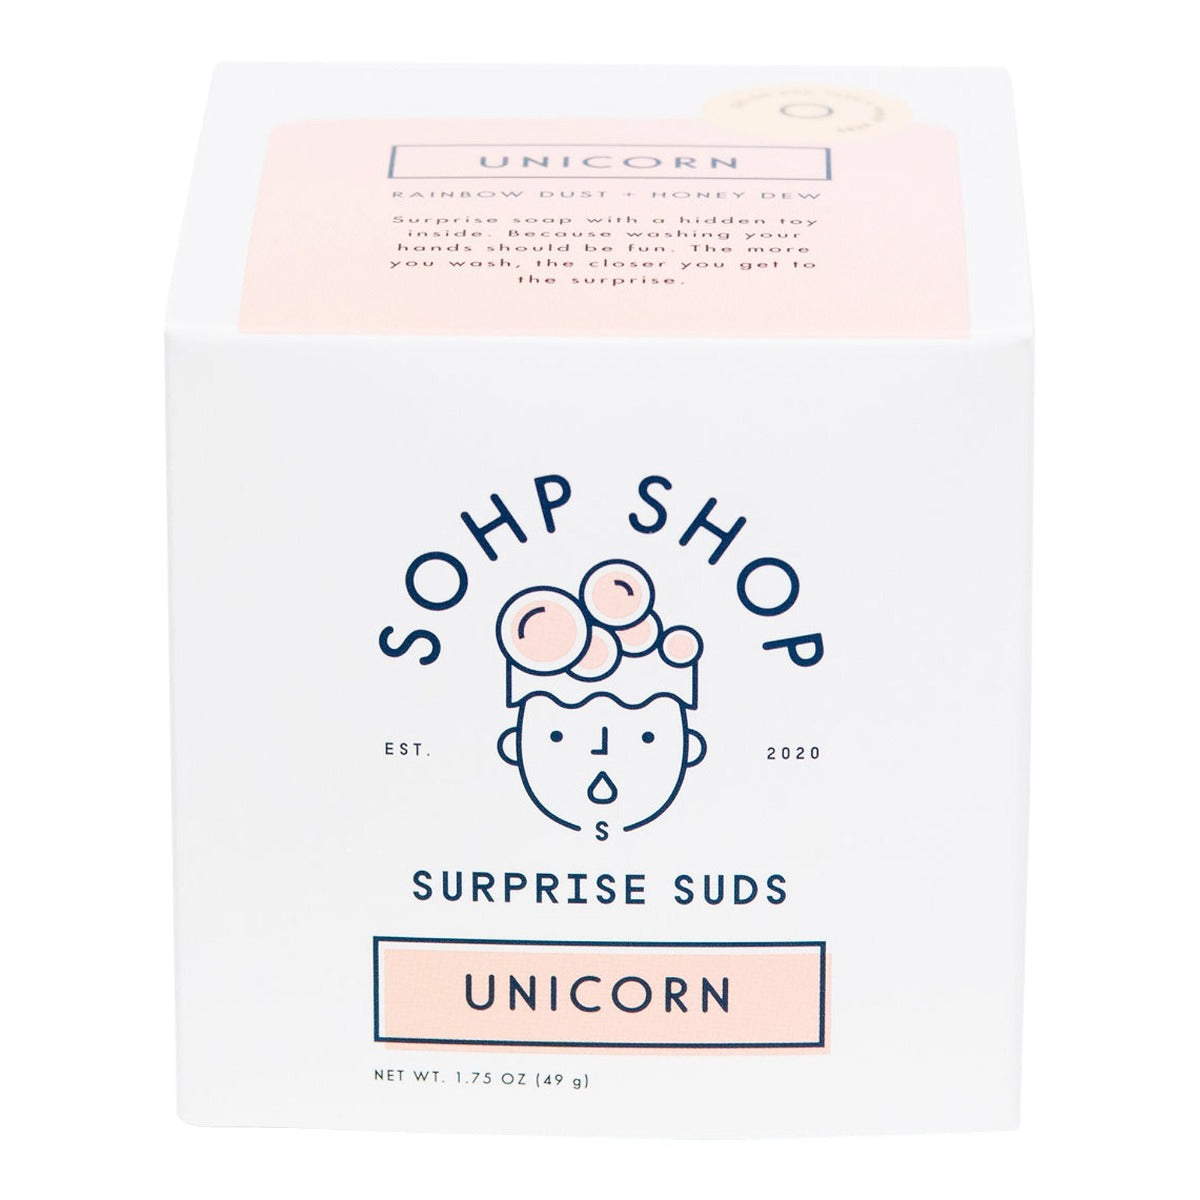 Mother Nature's Best Market SOHP SHOP Suprise Suds: Unicorn Cruelty-Free, Reusable/Recyclable